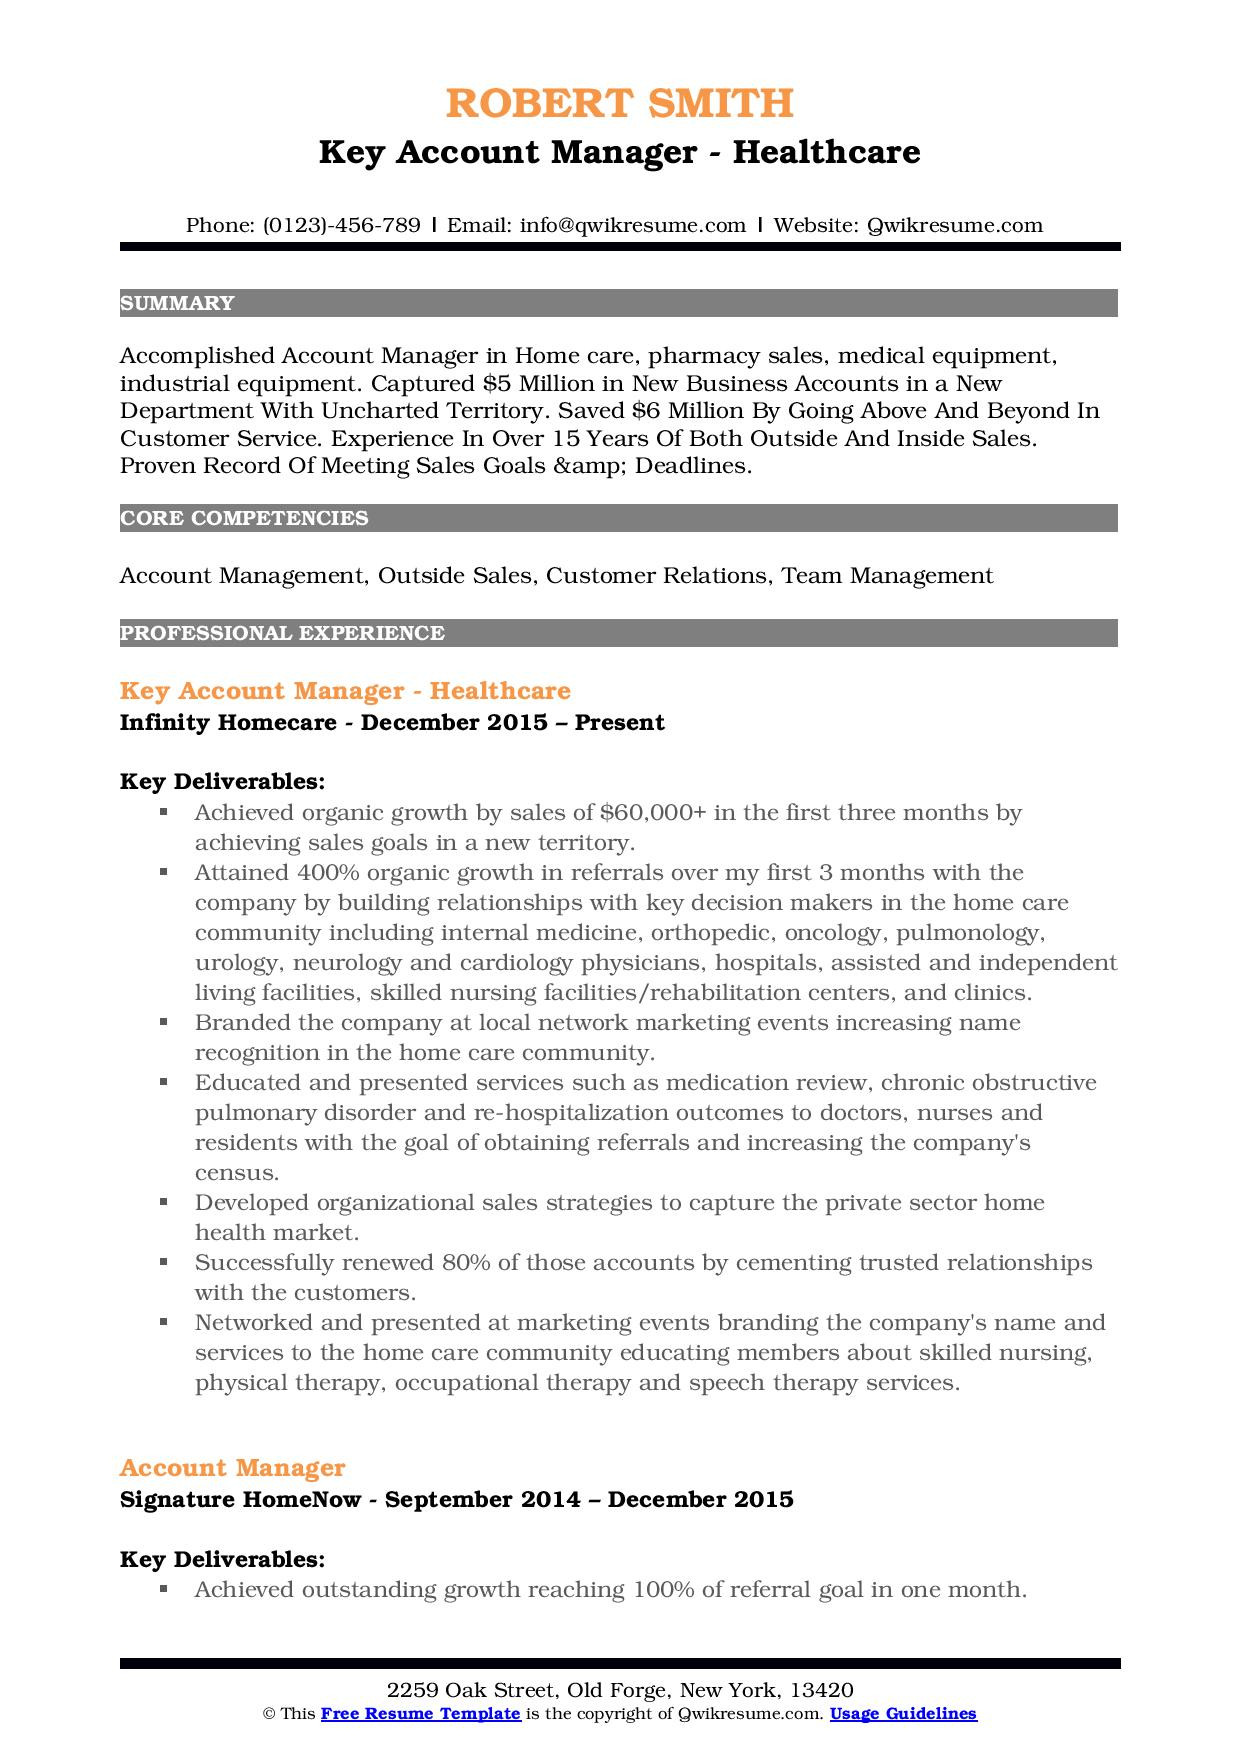 Inside Sales Account Manager Resume Sample Looking for A Great Account Manager Resume? Here You are!